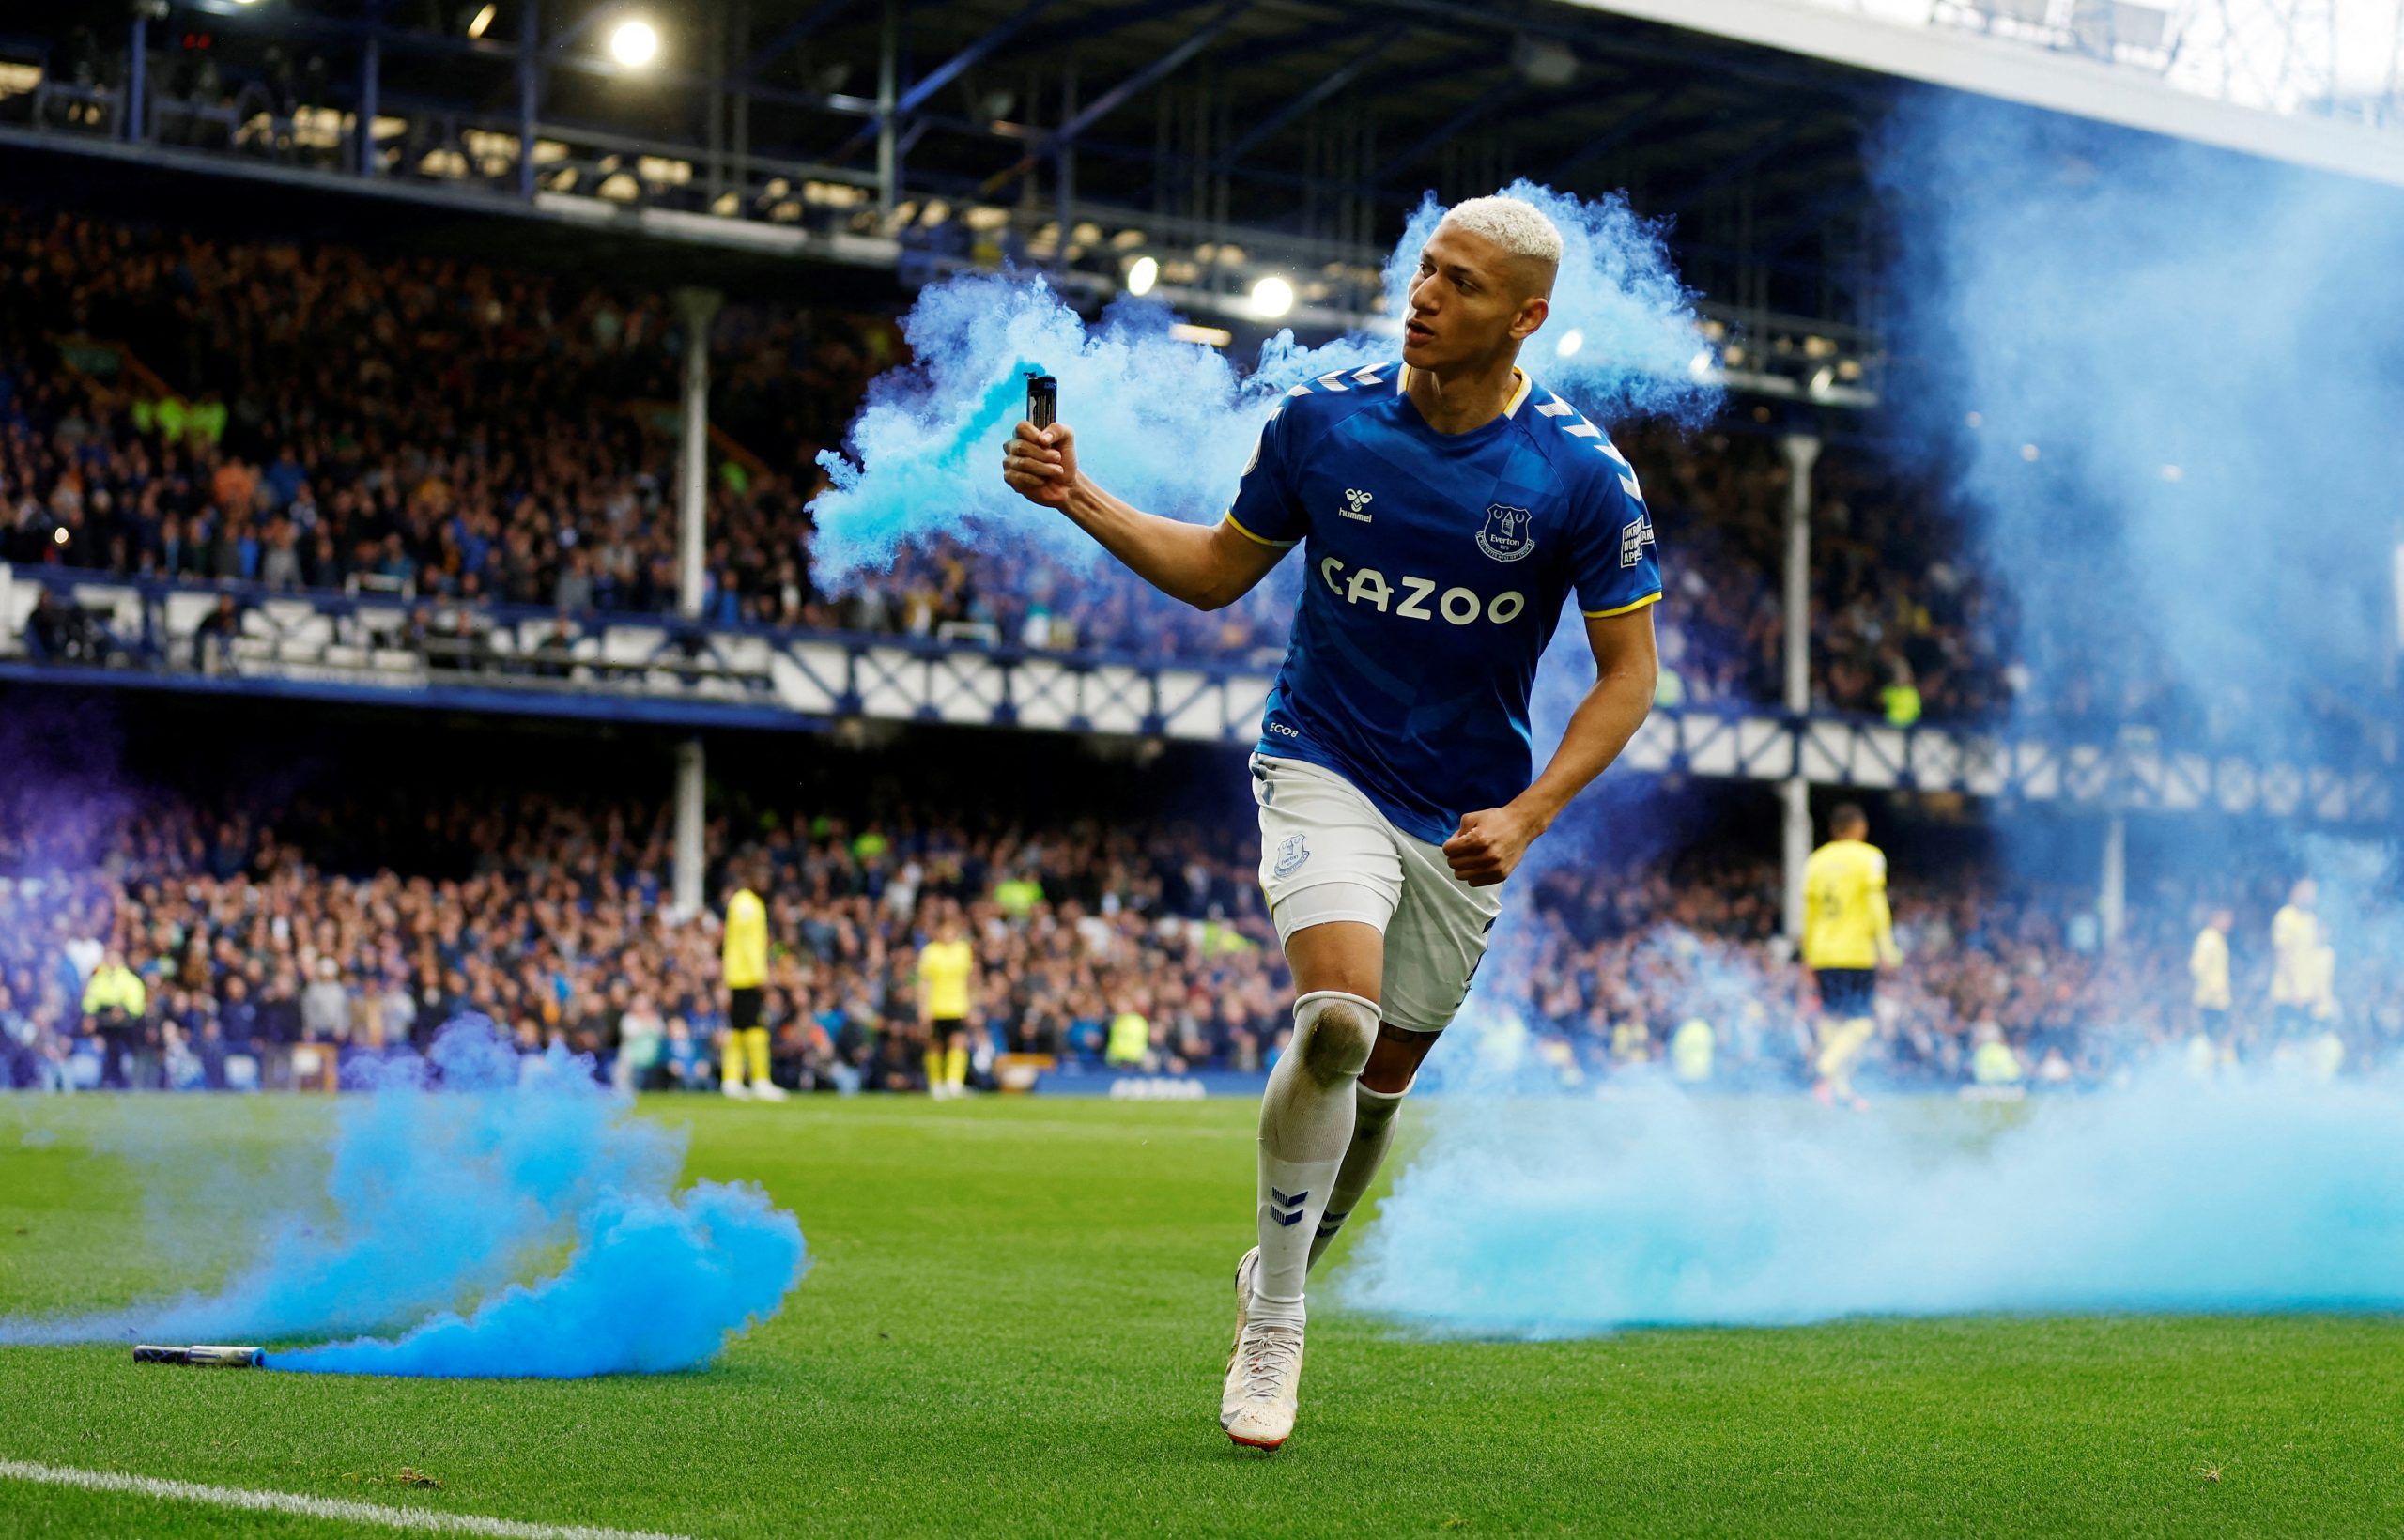 Soccer Football - Premier League - Everton v Chelsea - Goodison Park, Liverpool, Britain - May 1, 2022  Everton's Richarlison celebrates scoring their first goal Action Images via Reuters/Jason Cairnduff EDITORIAL USE ONLY. No use with unauthorized audio, video, data, fixture lists, club/league logos or 'live' services. Online in-match use limited to 75 images, no video emulation. No use in betting, games or single club /league/player publications.  Please contact your account representative for